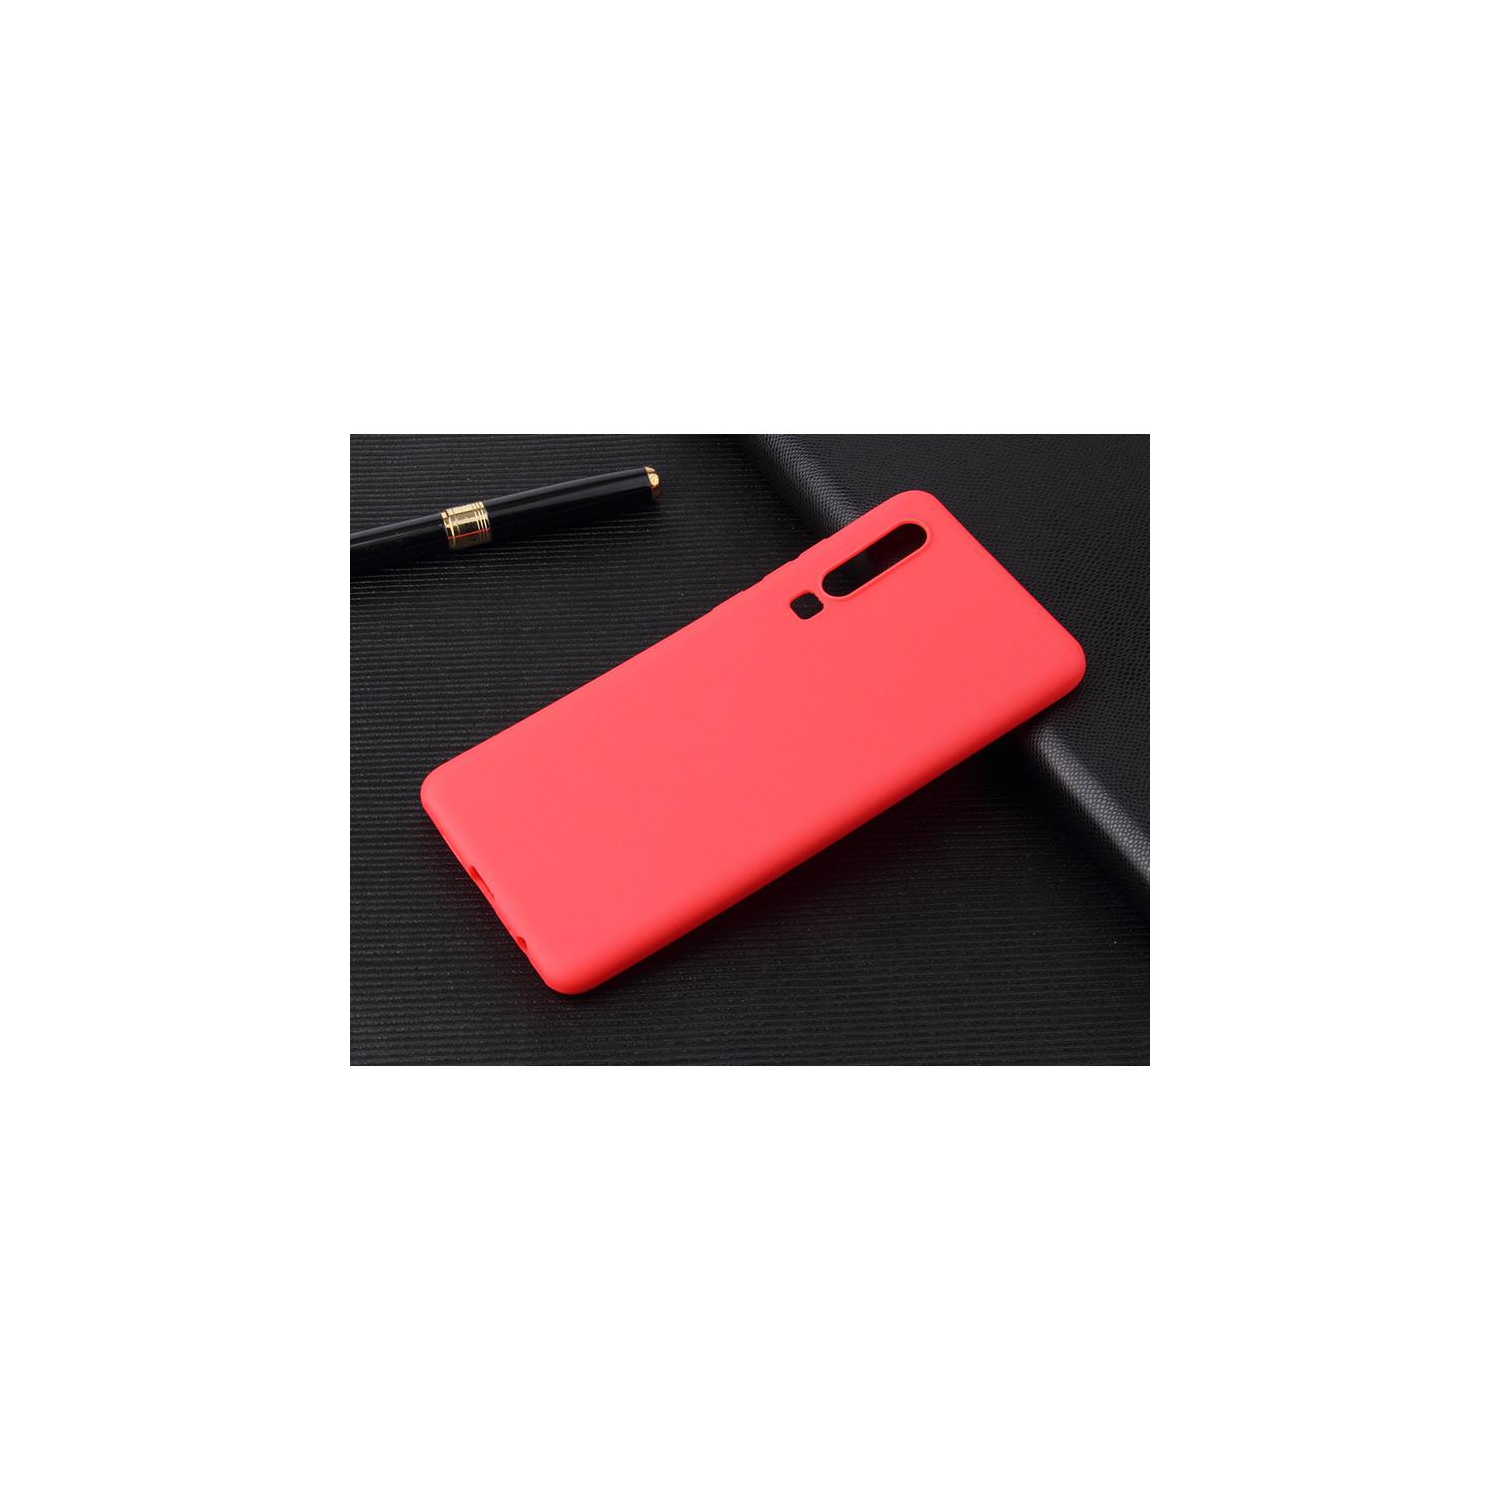 PANDACO Soft Shell Matte Red Case for Huawei P30